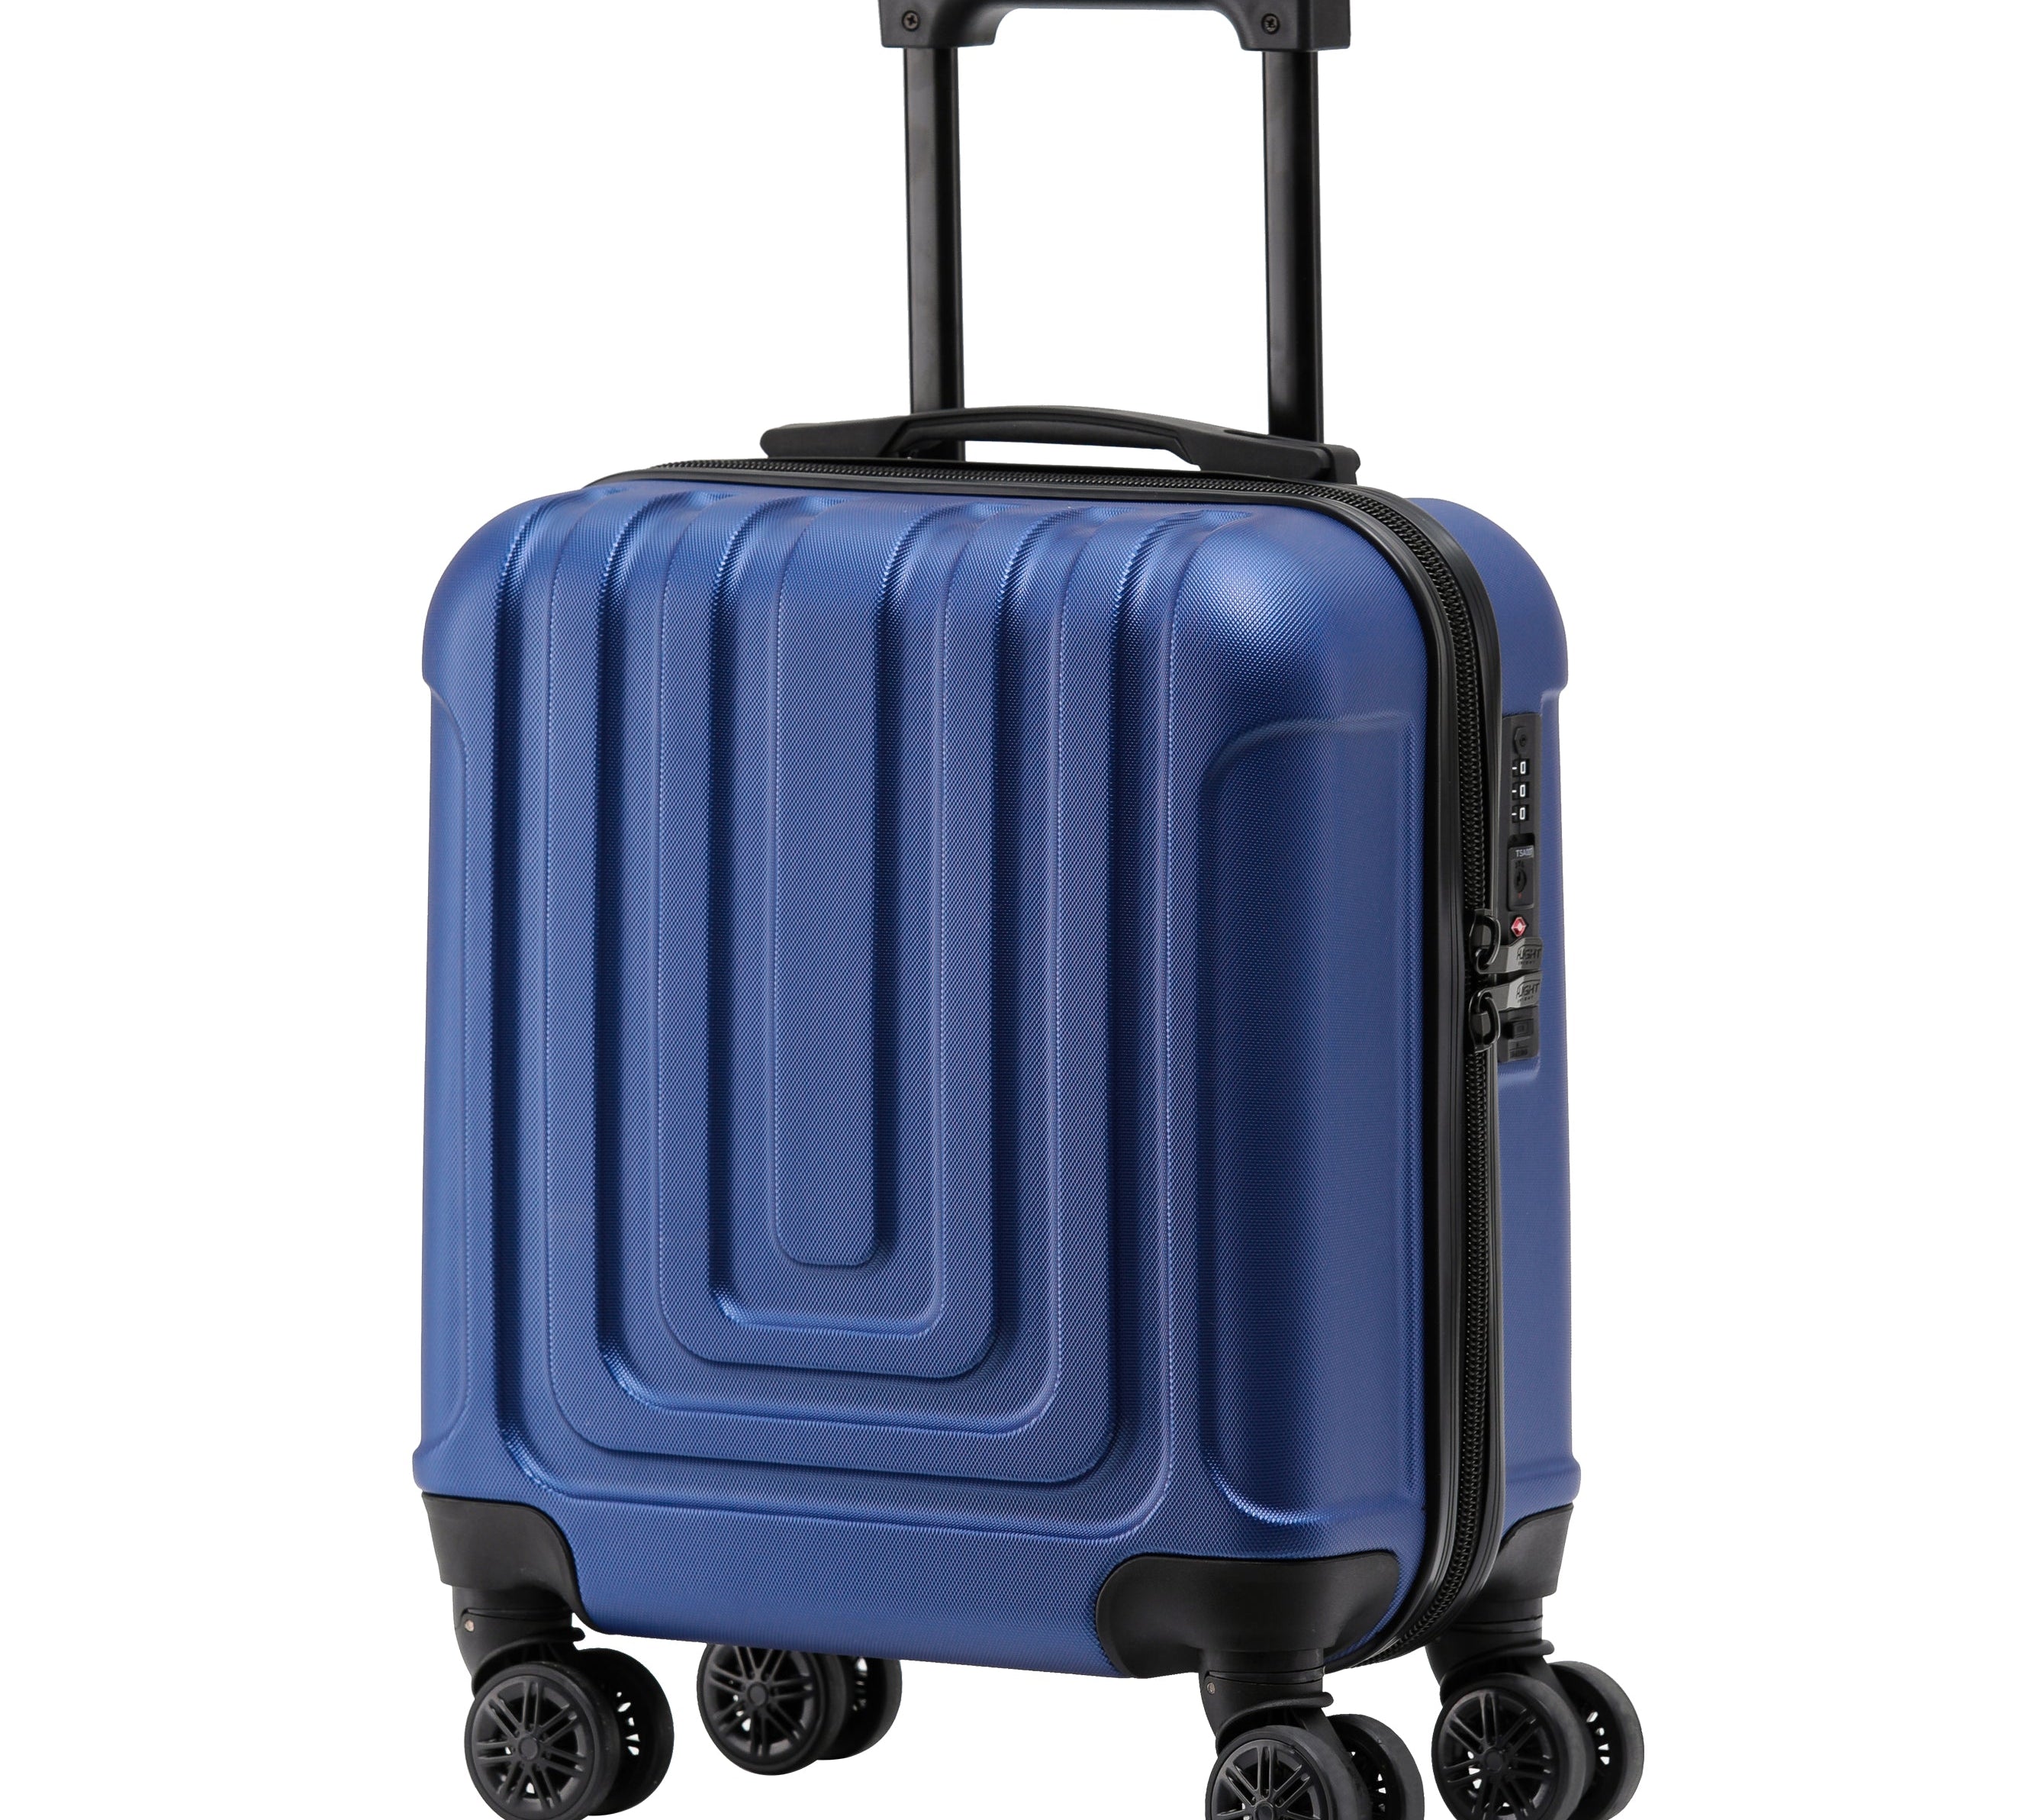 45x36x20cm Premium Hard Shell Lightweight Cabin Suitcase - 8 Spinner Wheels - Built-in TSA Lock & USB Port - Luggage Approved for Over 100 Airlines Including easyJet Underseat